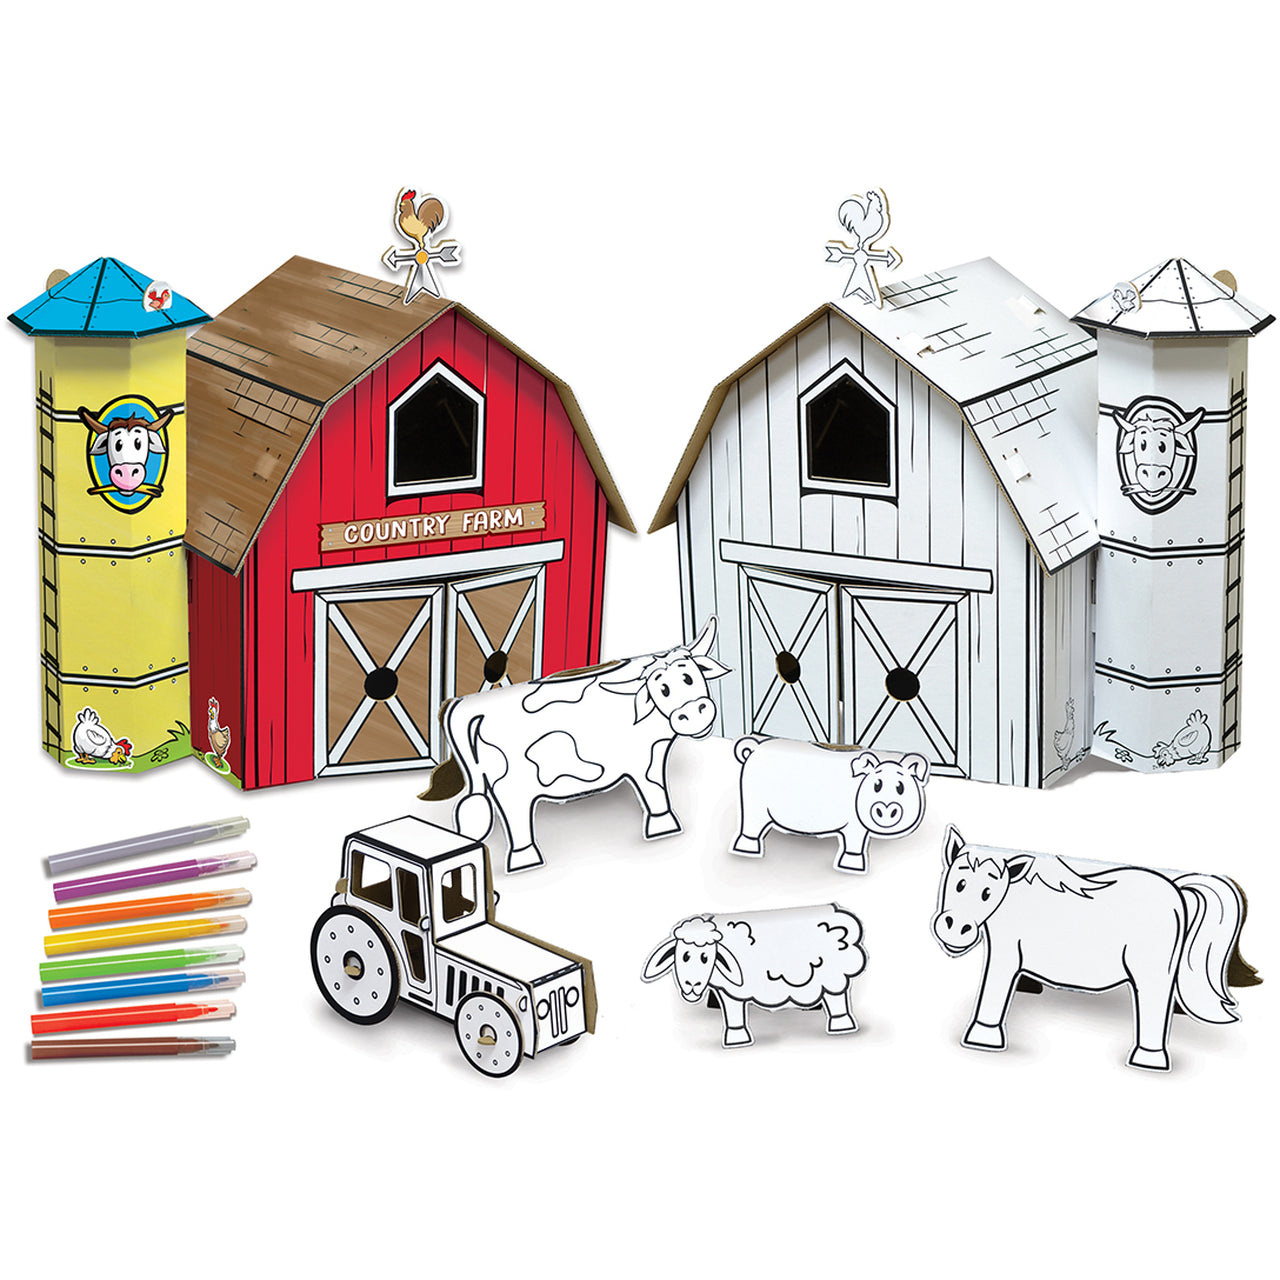 Country Farm Buildable Cardboard Creations Kit by Masterpieces